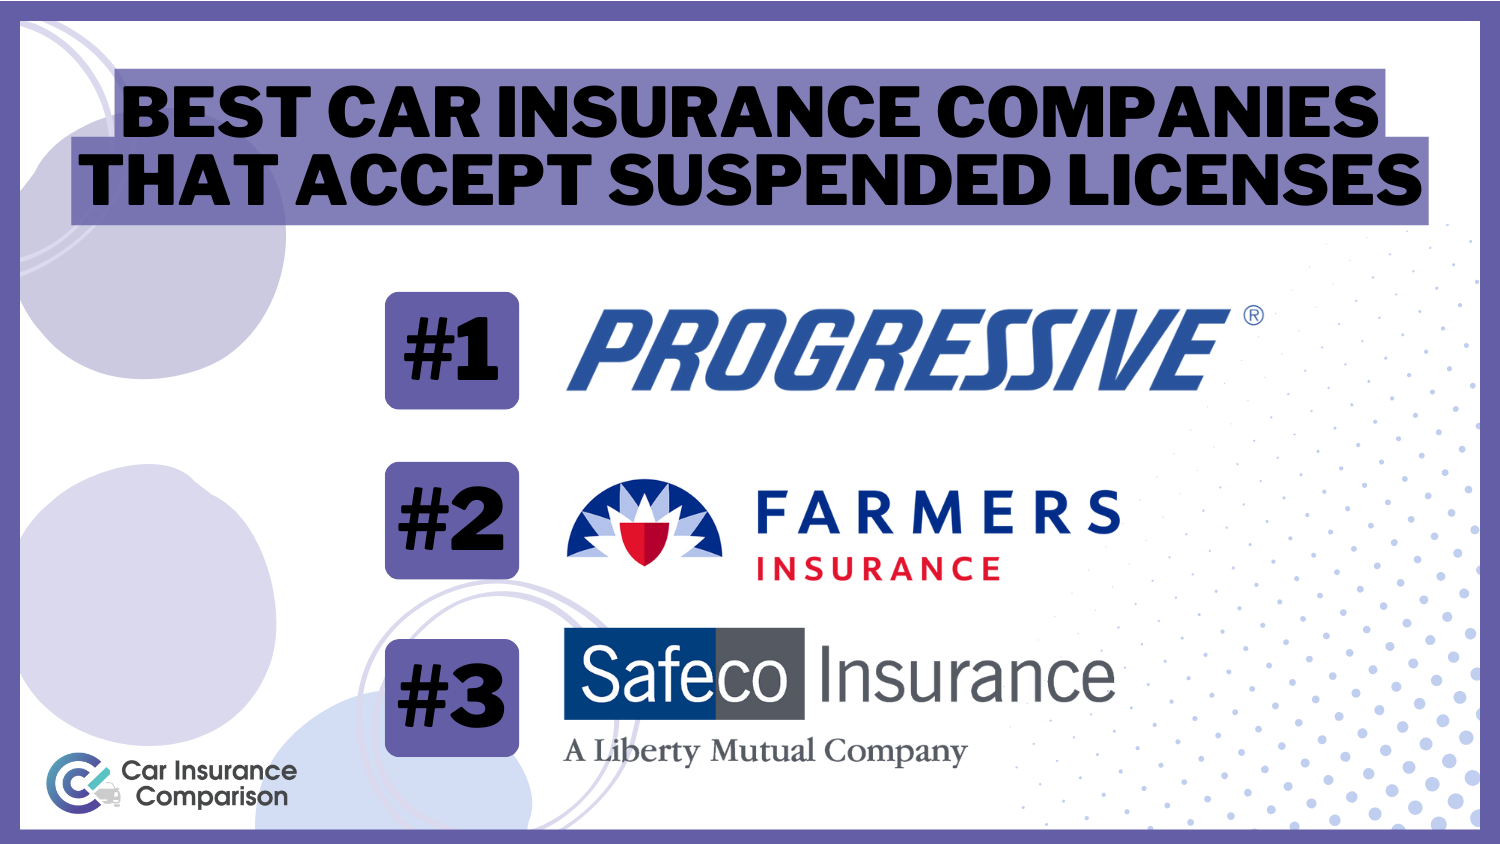 Best Car Insurance Companies That Accept Suspended Licenses